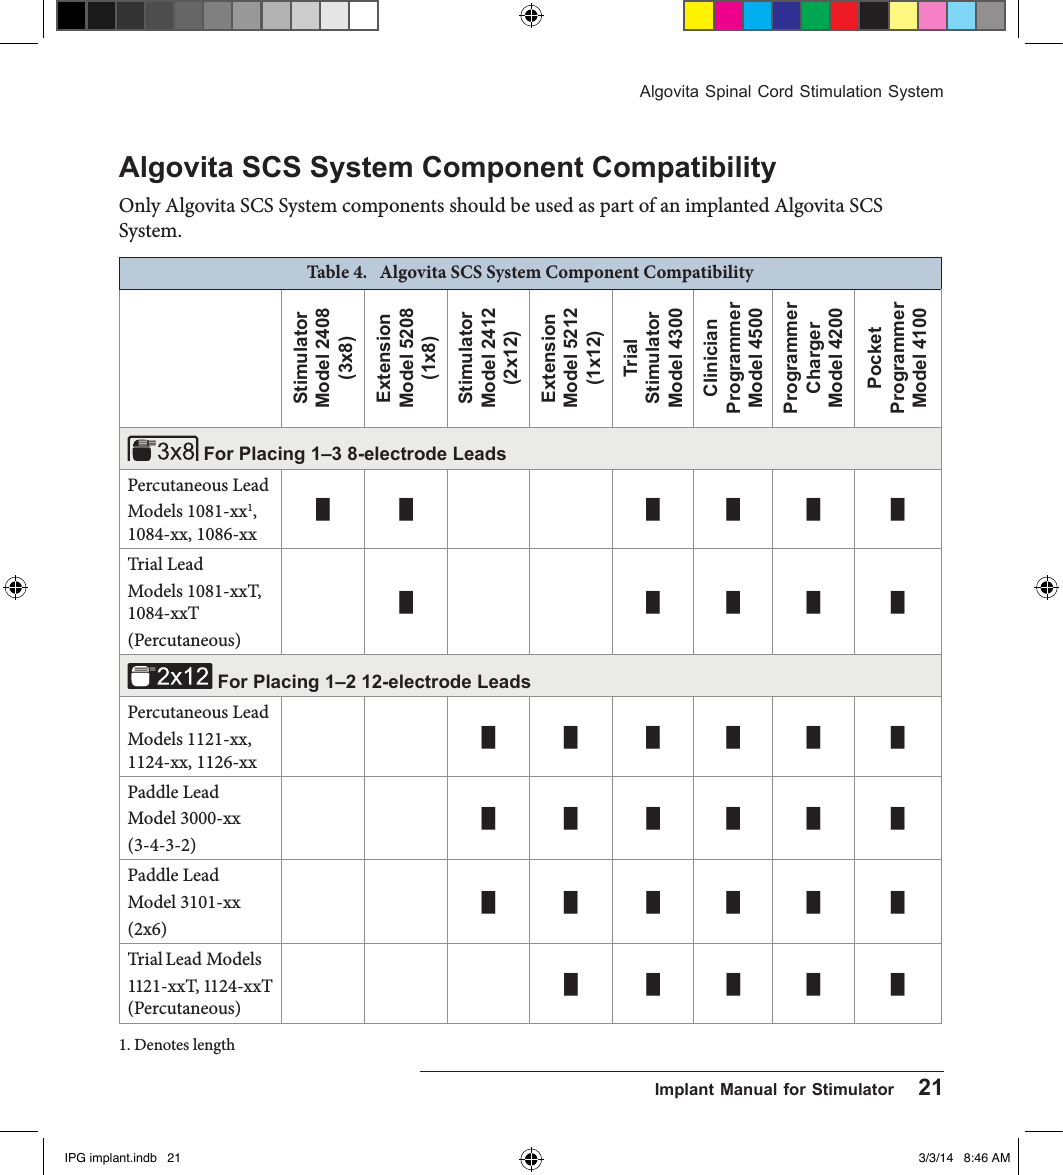 Algovita Spinal Cord Stimulation System  Implant Manual for Stimulator    21Algovita SCS System Component CompatibilityOnly Algovita SCS System components should be used as part of an implanted Algovita SCS System.Table 4.  Algovita SCS System Component CompatibilityStimulator Model 2408 (3x8)Extension Model 5208 (1x8)Stimulator Model 2412 (2x12)Extension Model 5212 (1x12)Trial  Stimulator Model 4300Clinician Programmer Model 4500Programmer Charger Model 4200Pocket Programmer Model 4100 For Placing 1–3 8-electrode Leads   Percutaneous LeadModels 1081-xx1, 1084-xx, 1086-xx █ █ █ █ █ █Trial LeadModels 1081-xxT, 1084-xxT(Percutaneous)█ █ █ █ █ For Placing 1–2 12-electrode Leads Percutaneous LeadModels 1121-xx, 1124-xx, 1126-xx█ █ █ █ █ █Paddle LeadModel 3000-xx(3-4-3-2)█ █ █ █ █ █Paddle LeadModel 3101-xx(2x6)█ █ █ █ █ █Trial Lead Models 1121-xxT, 1124-xxT (Percutaneous)█ █ █ █ █1. Denotes lengthIPG implant.indb   21 3/3/14   8:46 AM